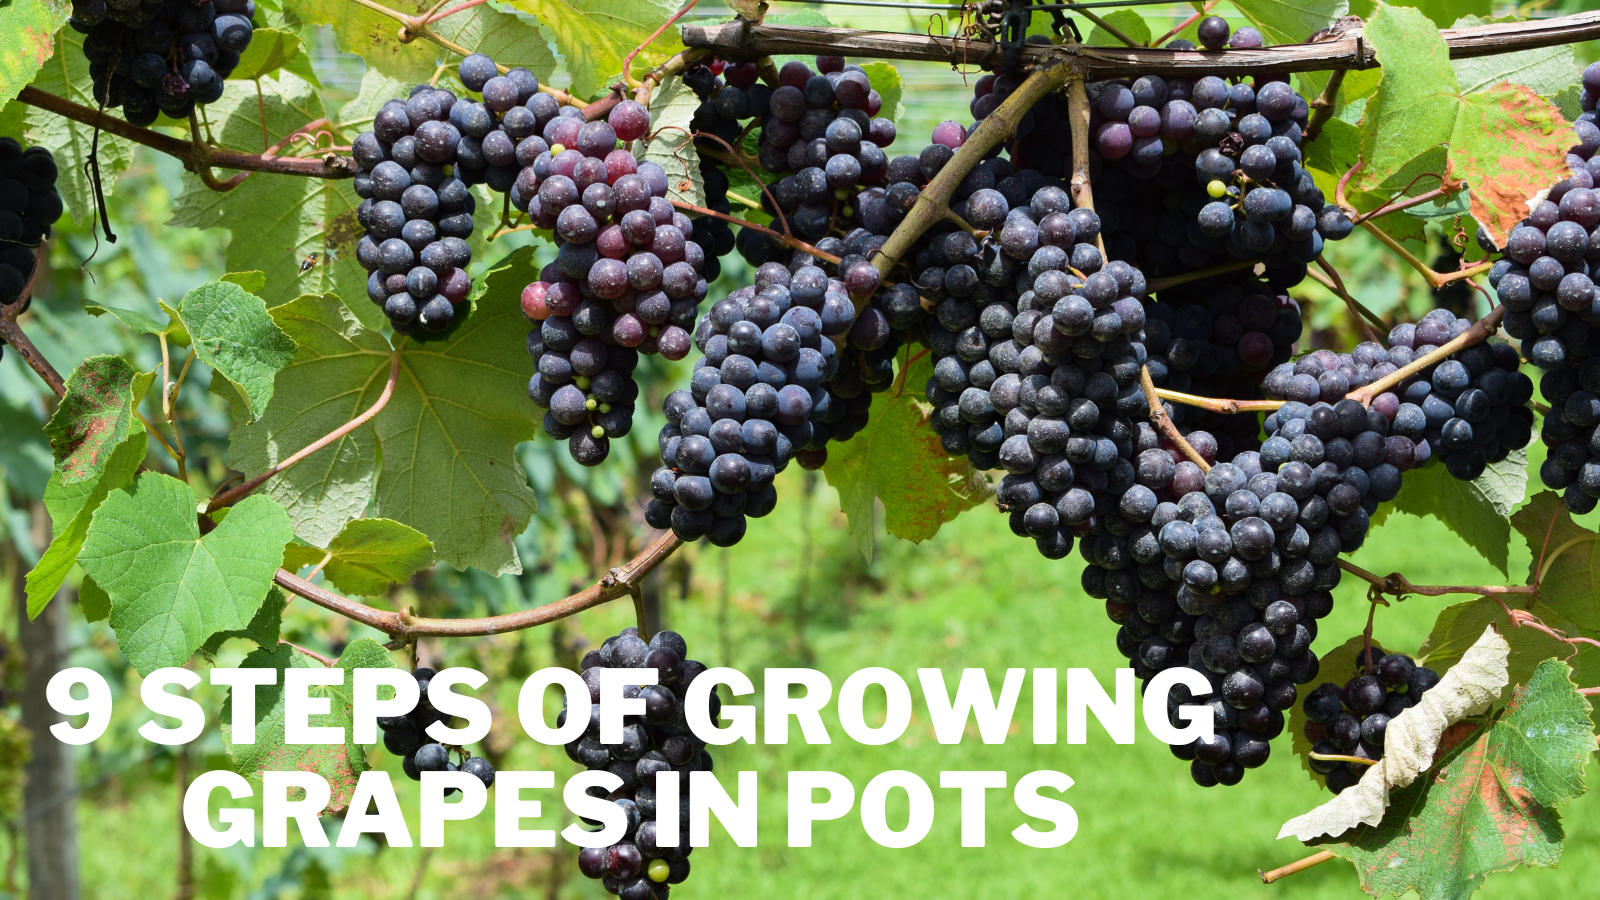 9 Steps Of Growing Grapes In Pots